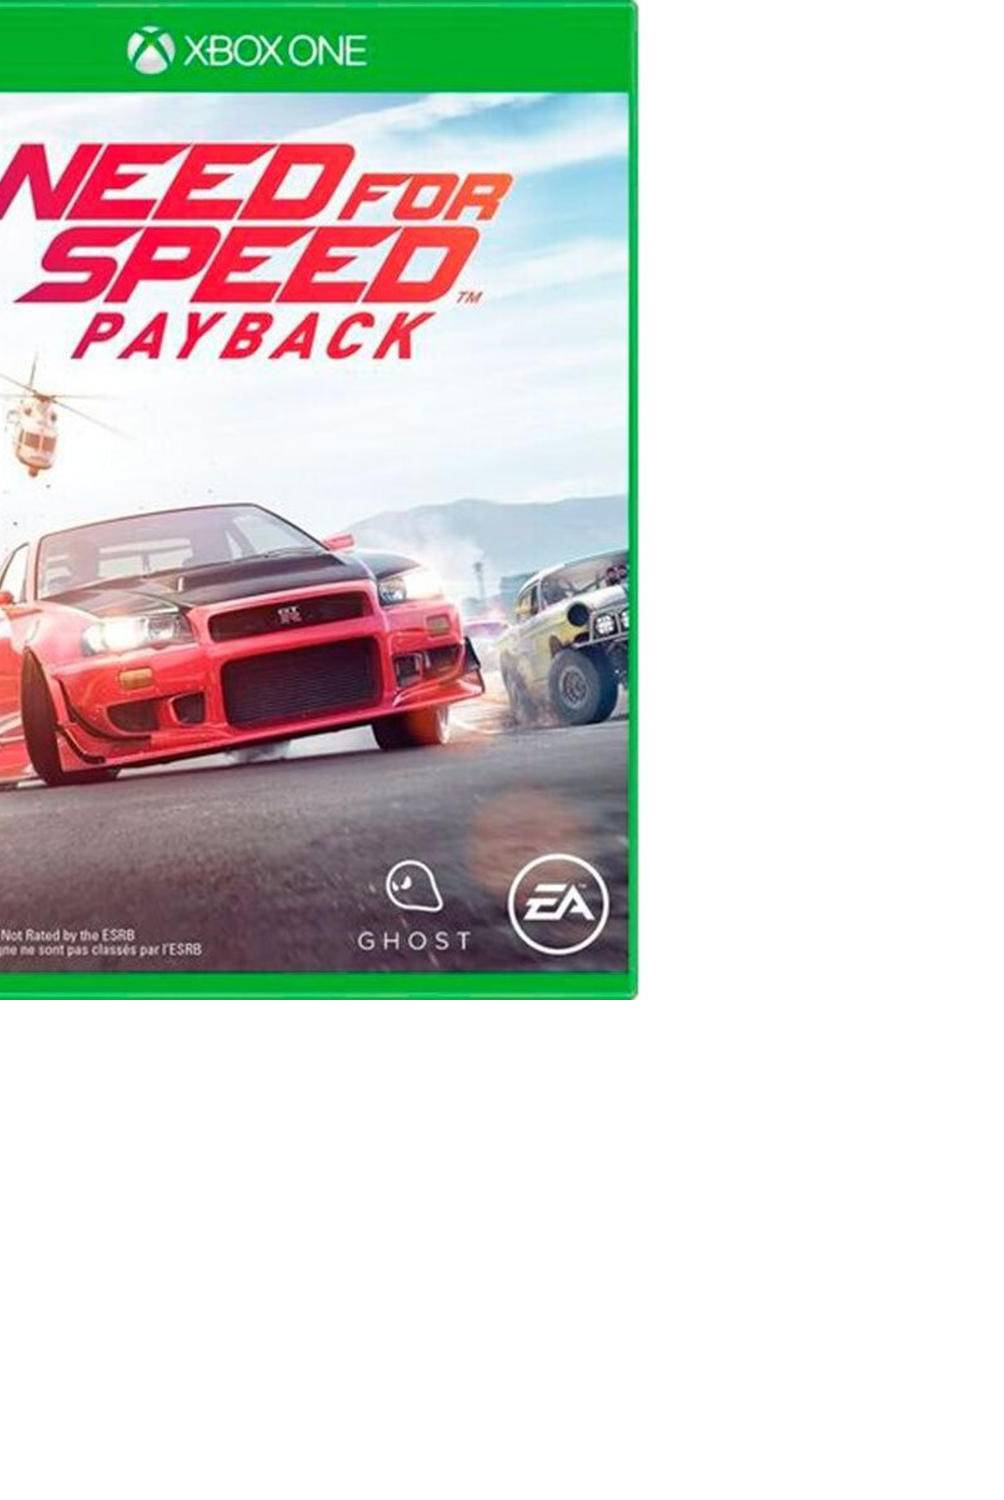 ELECTRONIC ARTS - Need For Speed Payback Xbox One